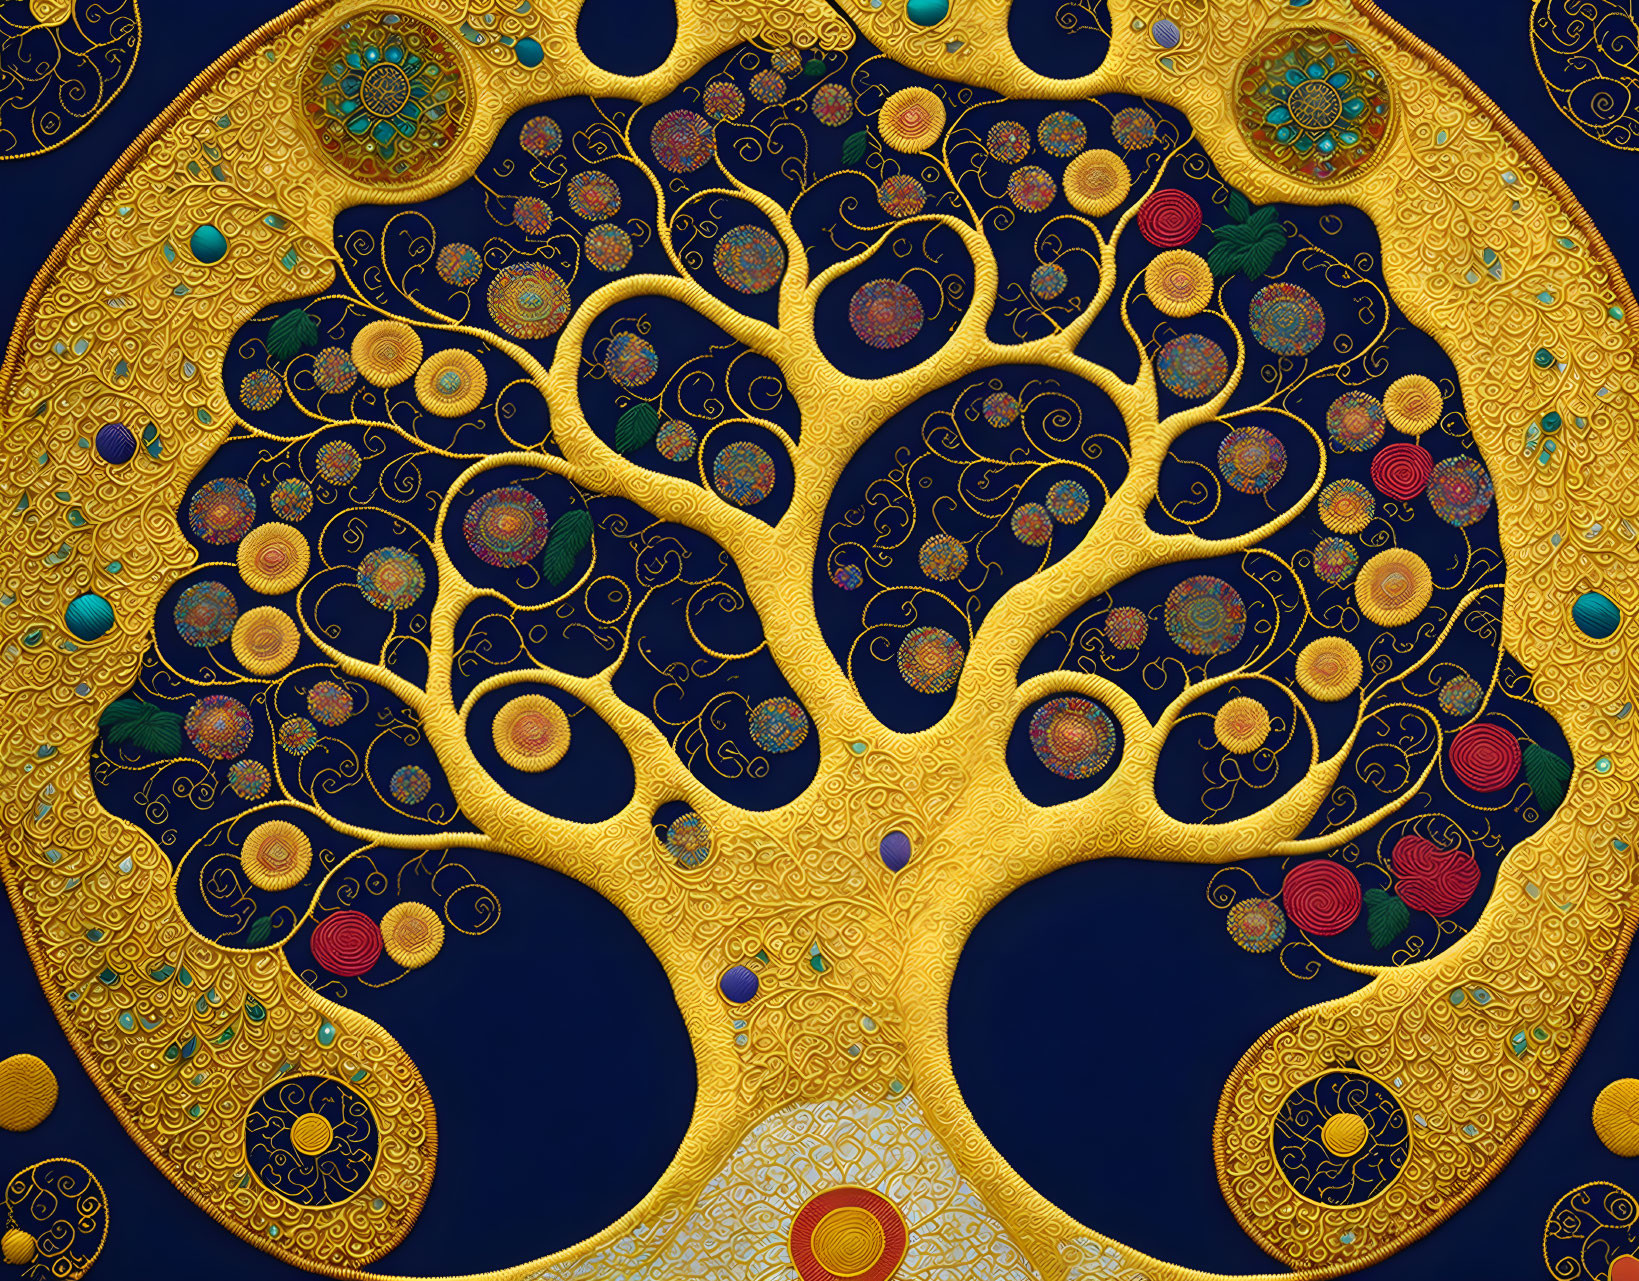 Golden ornate tree with circular motifs on deep blue background